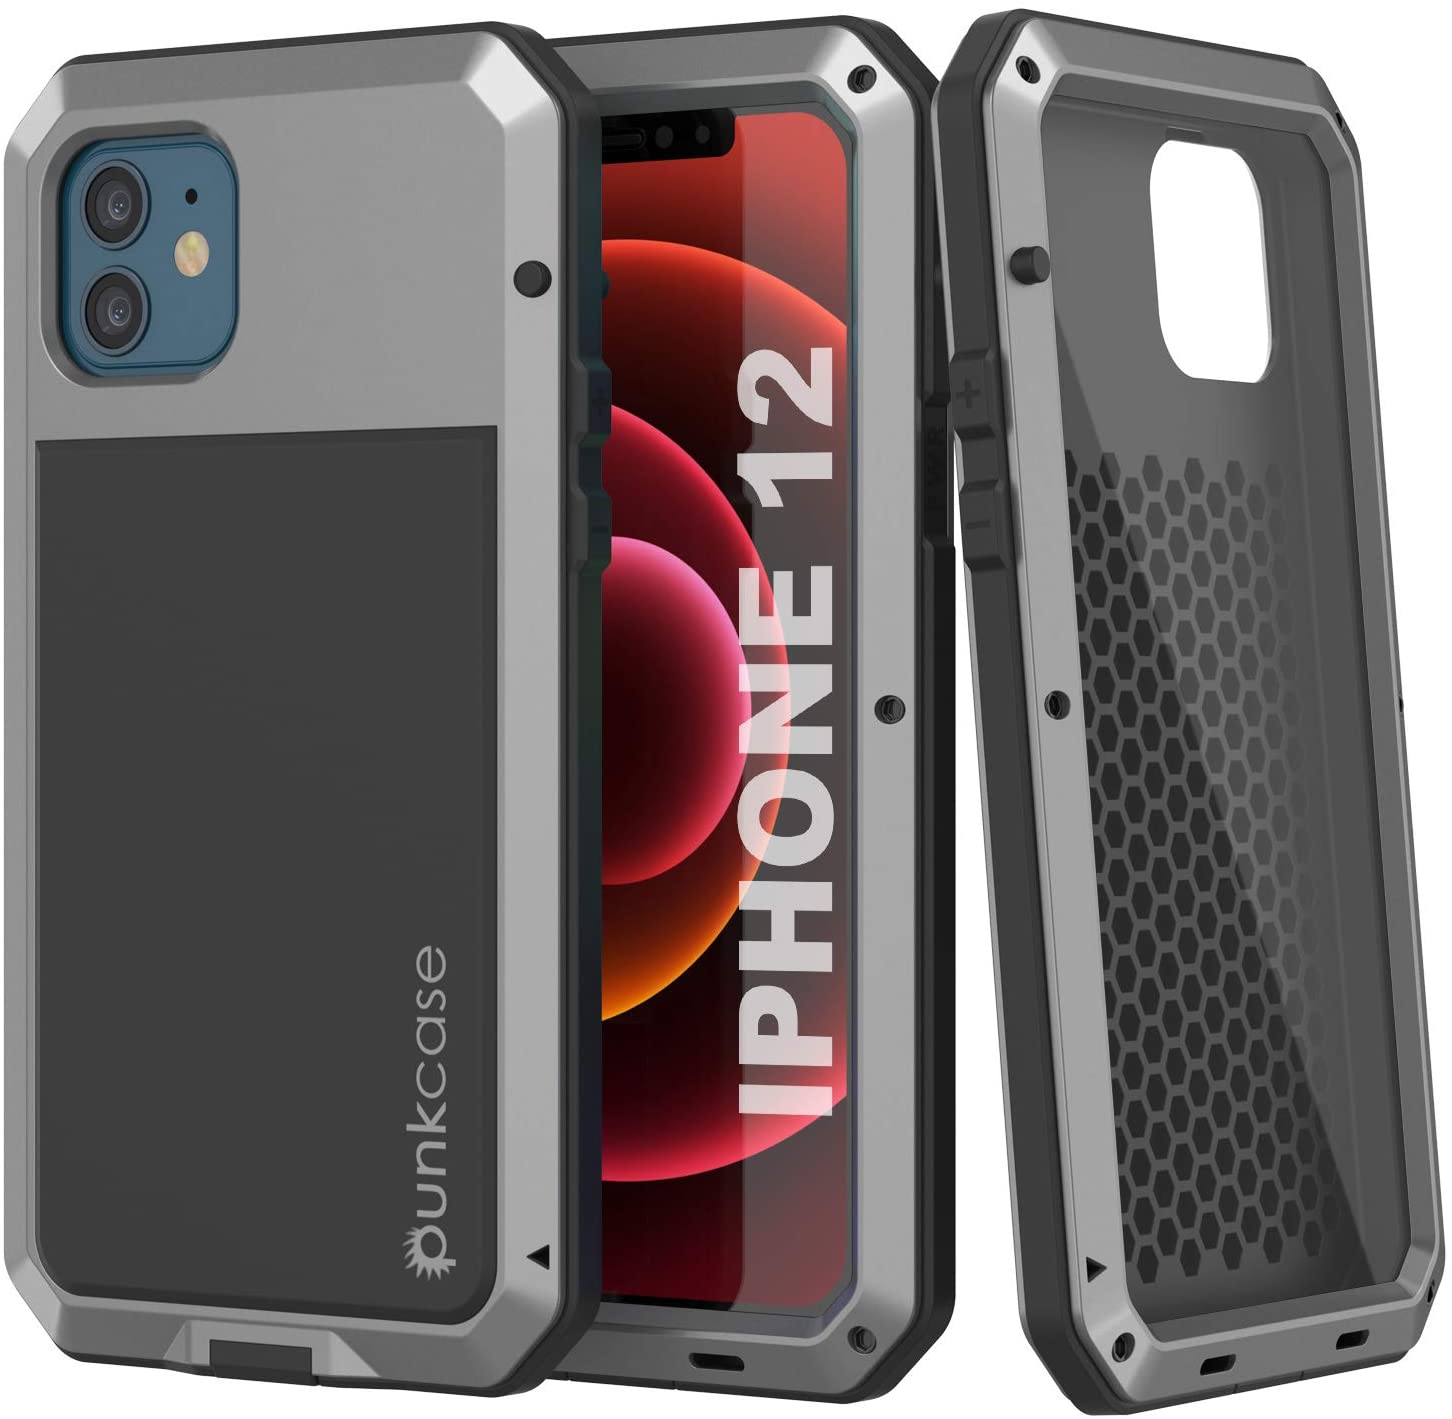 dekorere Observere Email iPhone 12 Metal Case, Heavy Duty Military Grade Armor Cover [shock pro –  punkcase